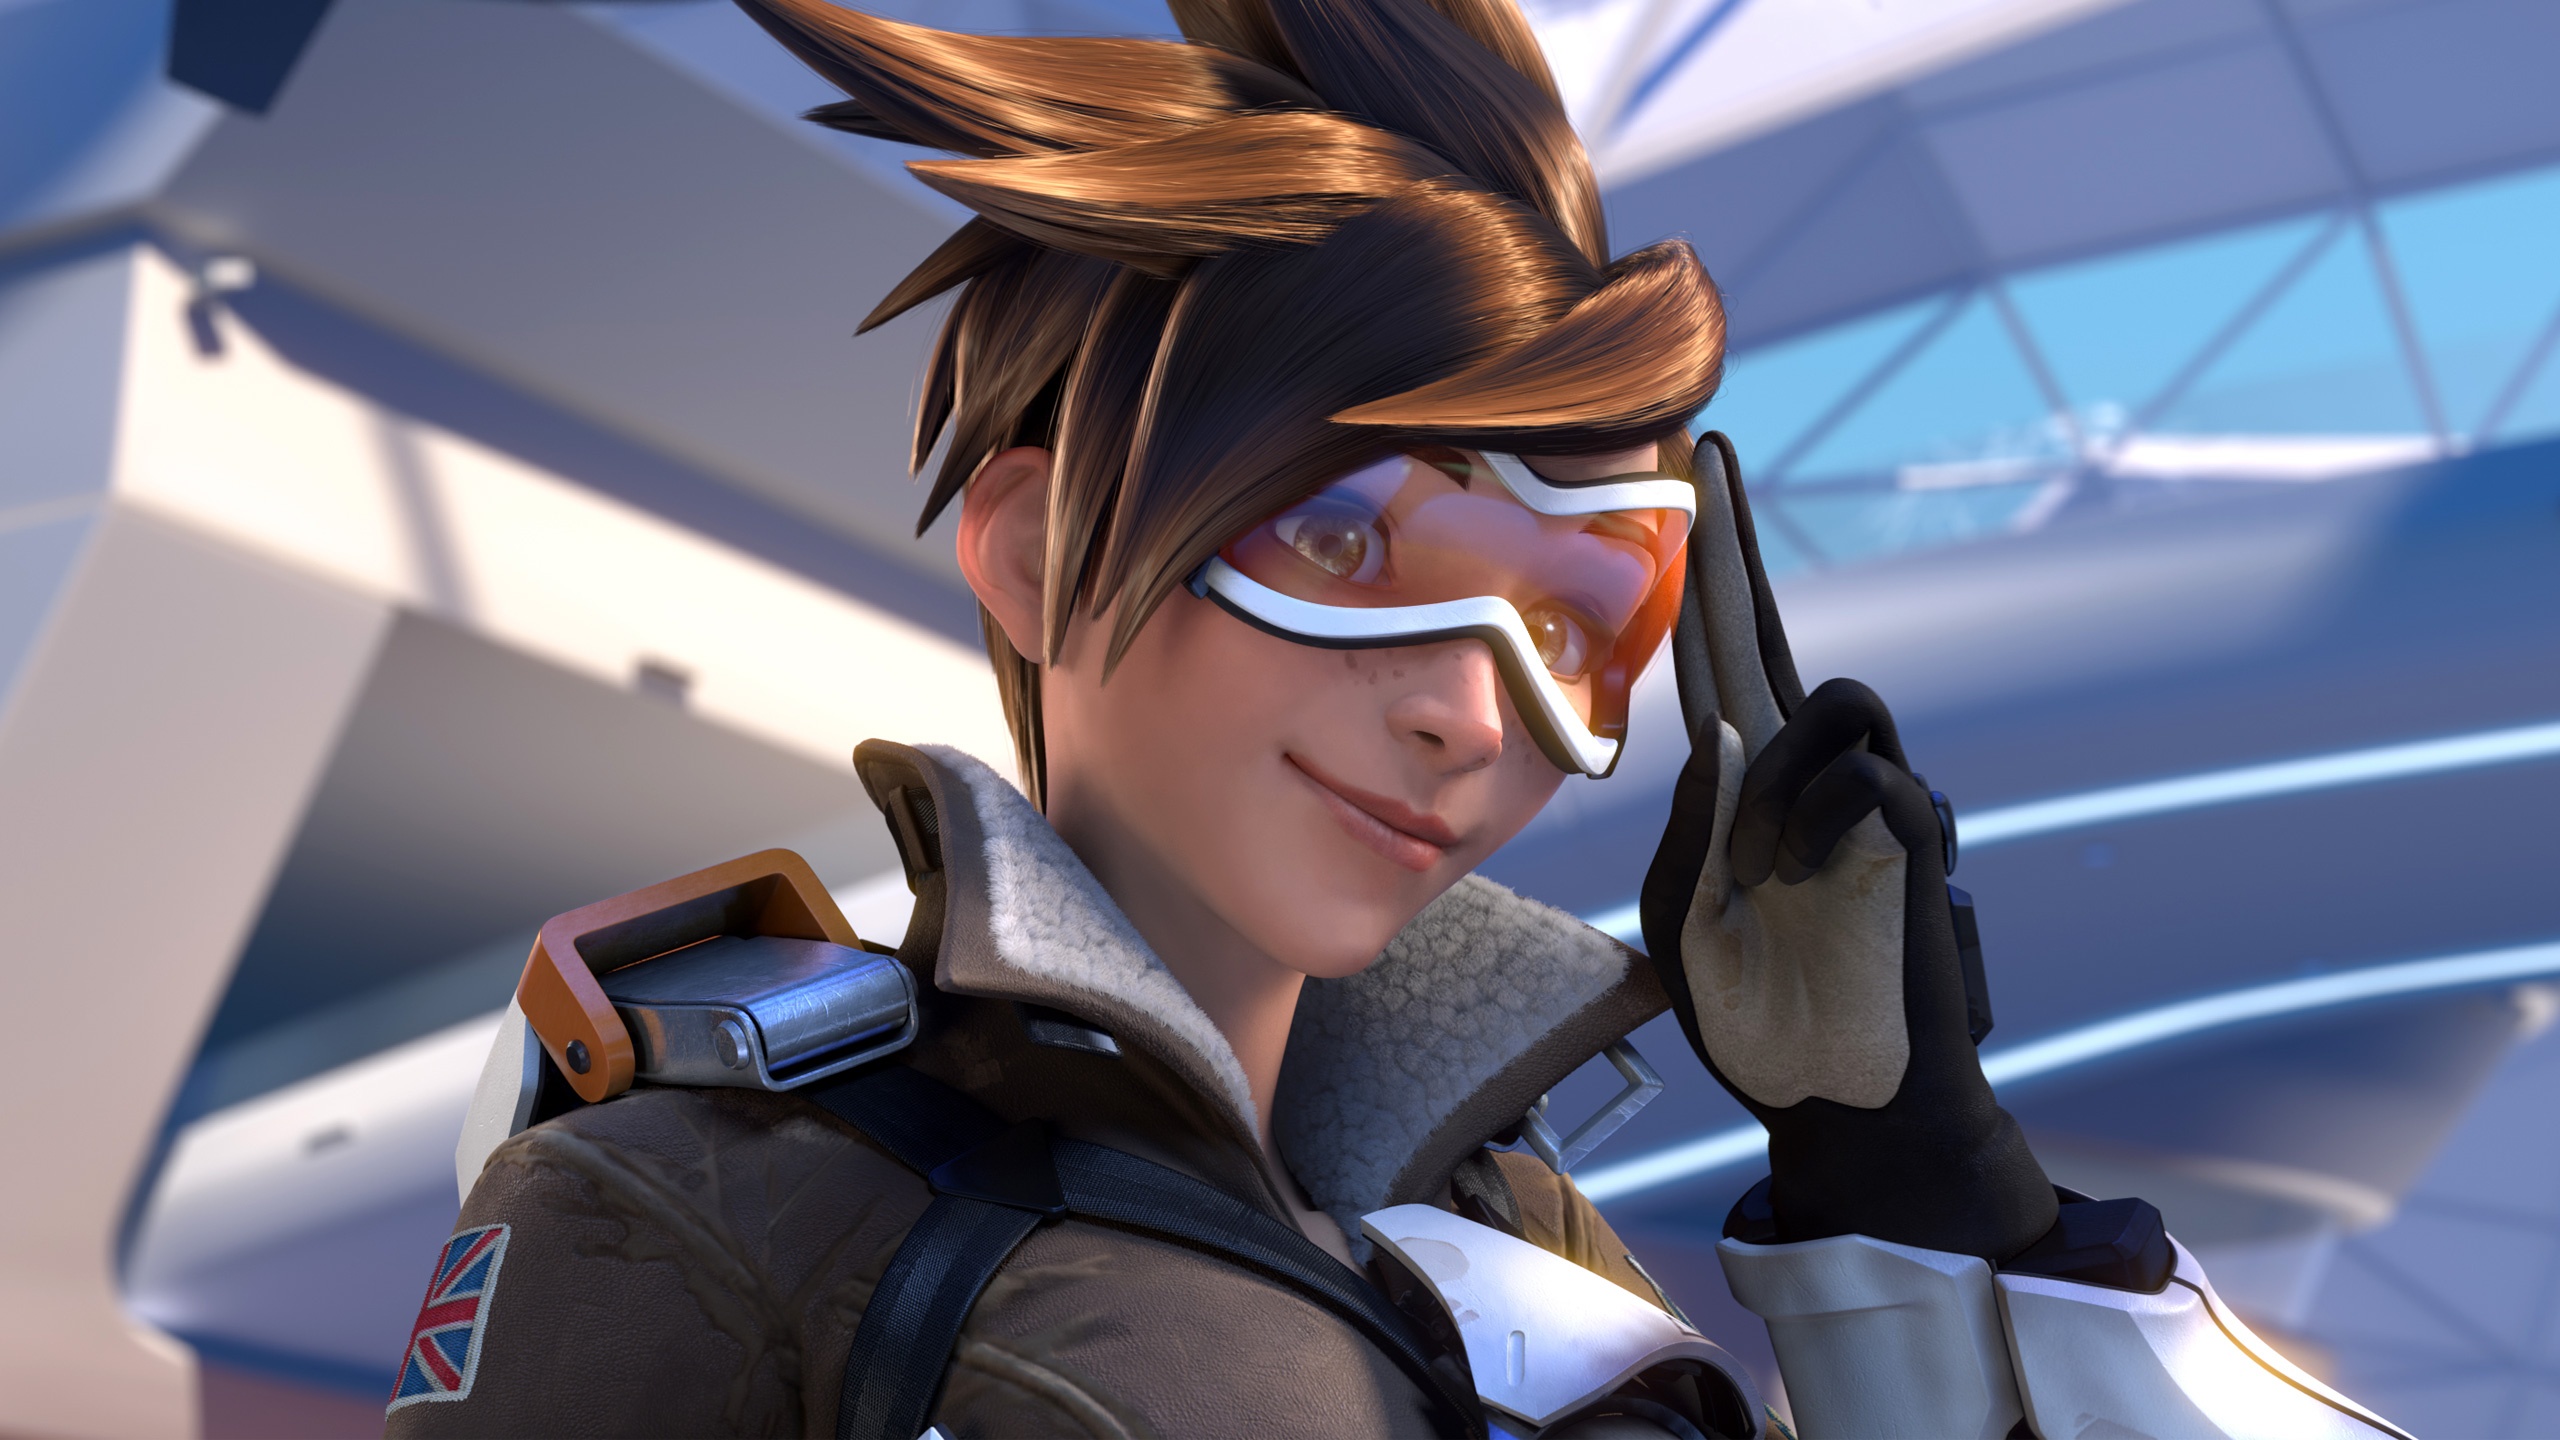 Tracer by PlanK-69